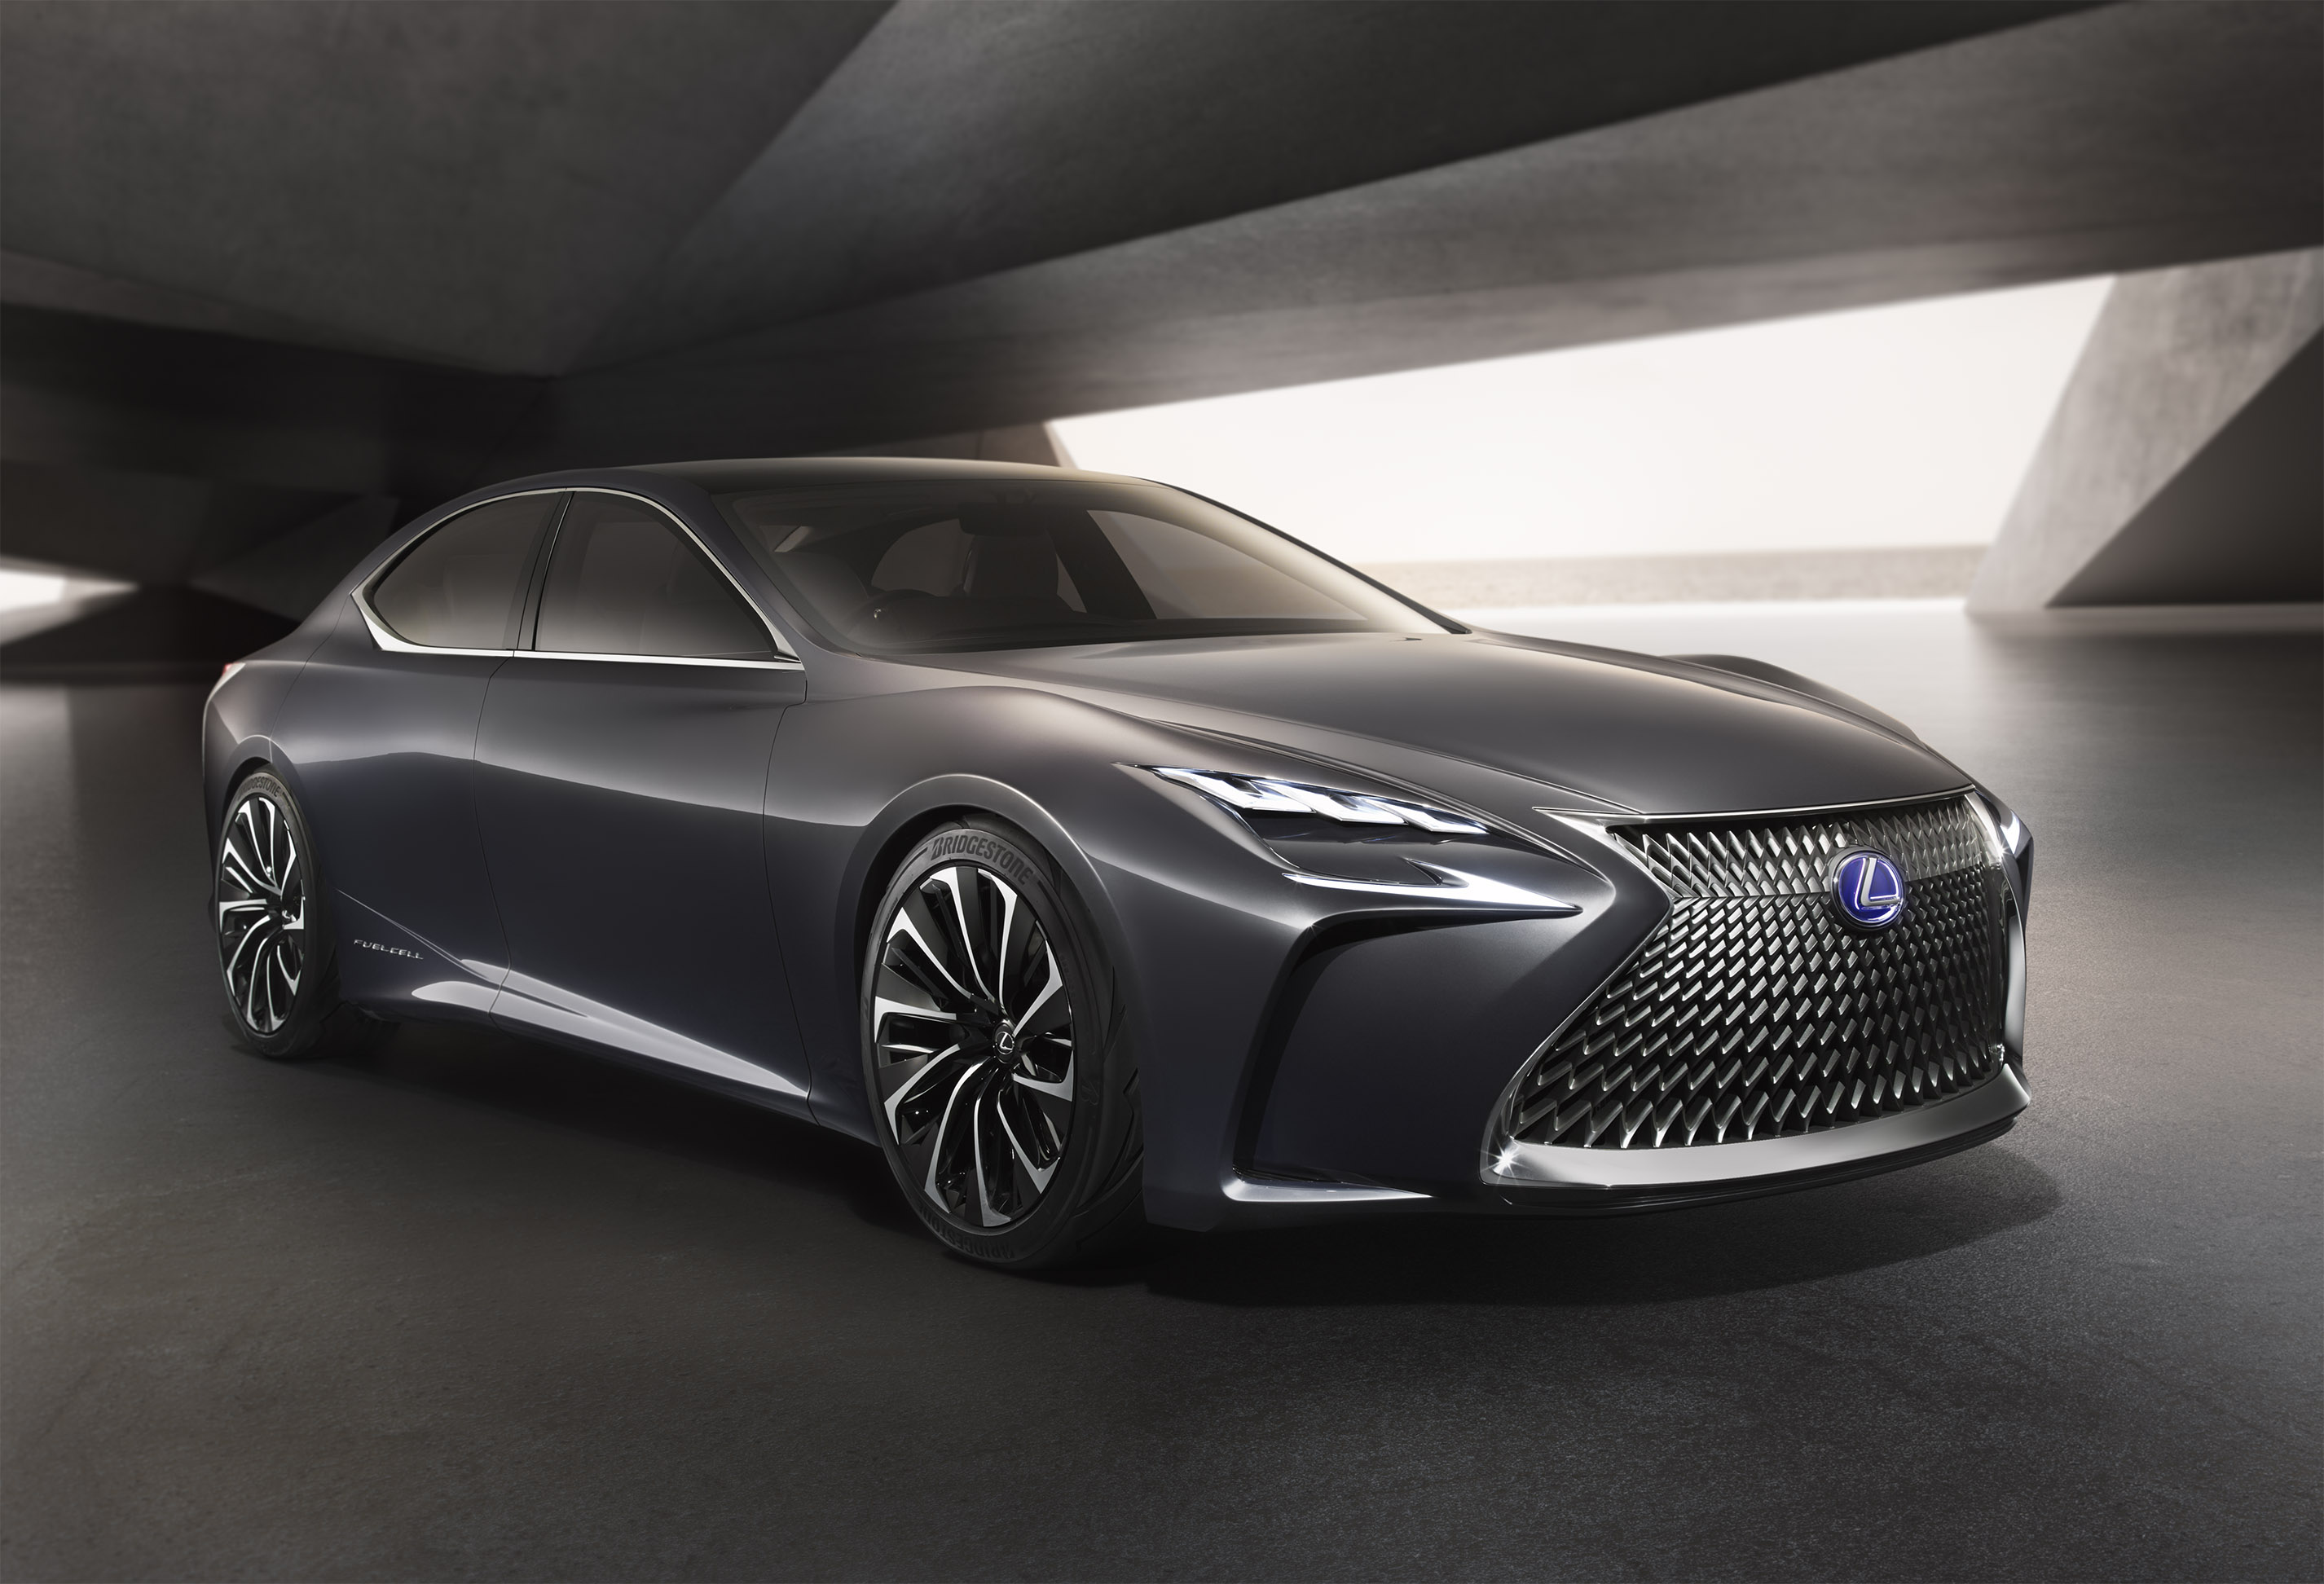 LEXUS' main concept is embodied in its first hydrogen fuel-cell vehicle, the LF-FC, featuring a fresh new styling theme. | LEXUS